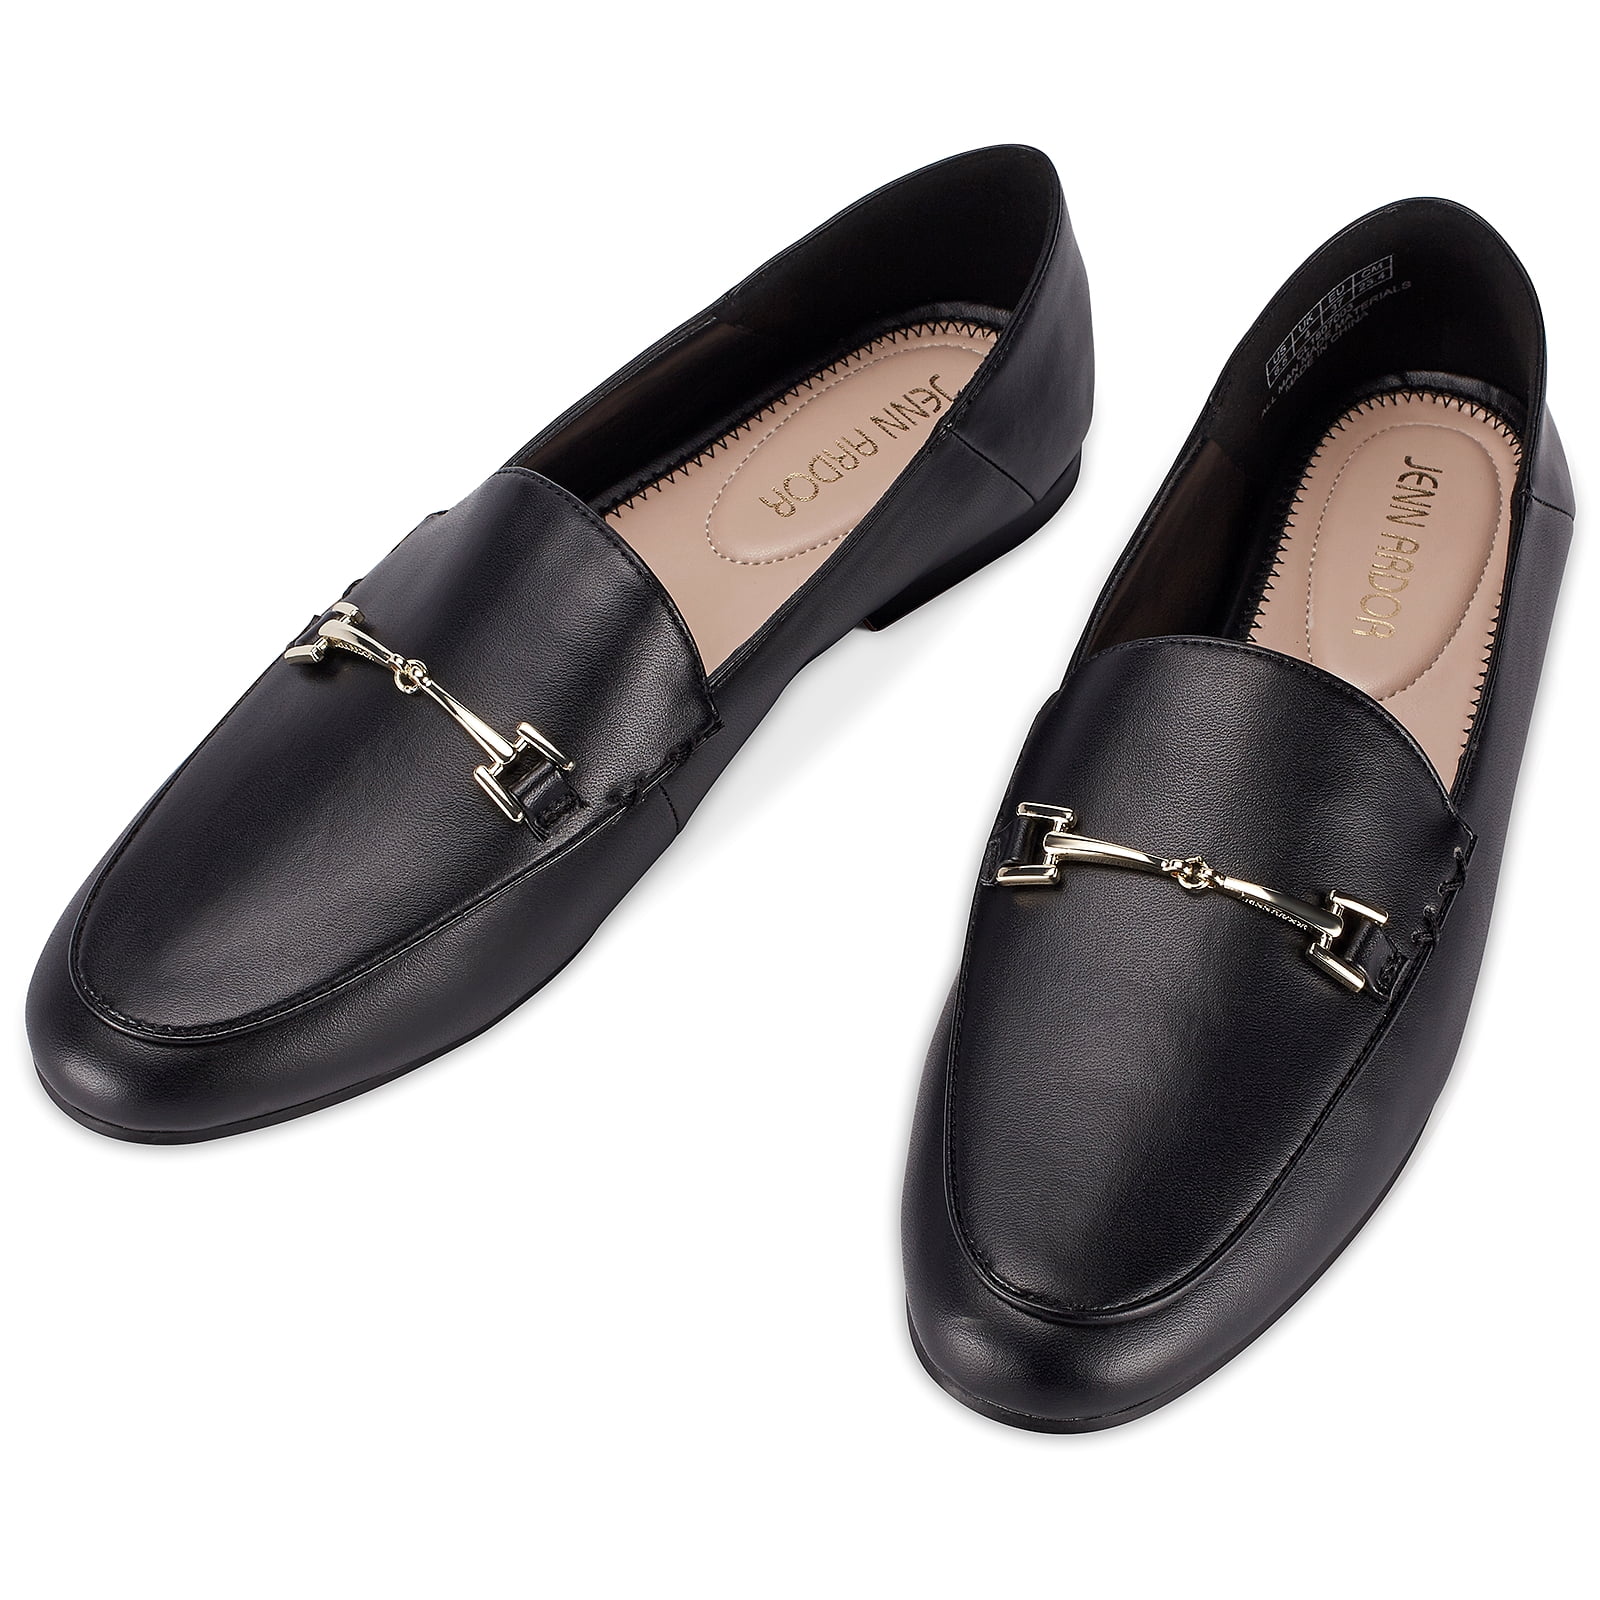 Womens Ladies Leather Loafer Comfortable Flats Driving Shoes Size 3-8